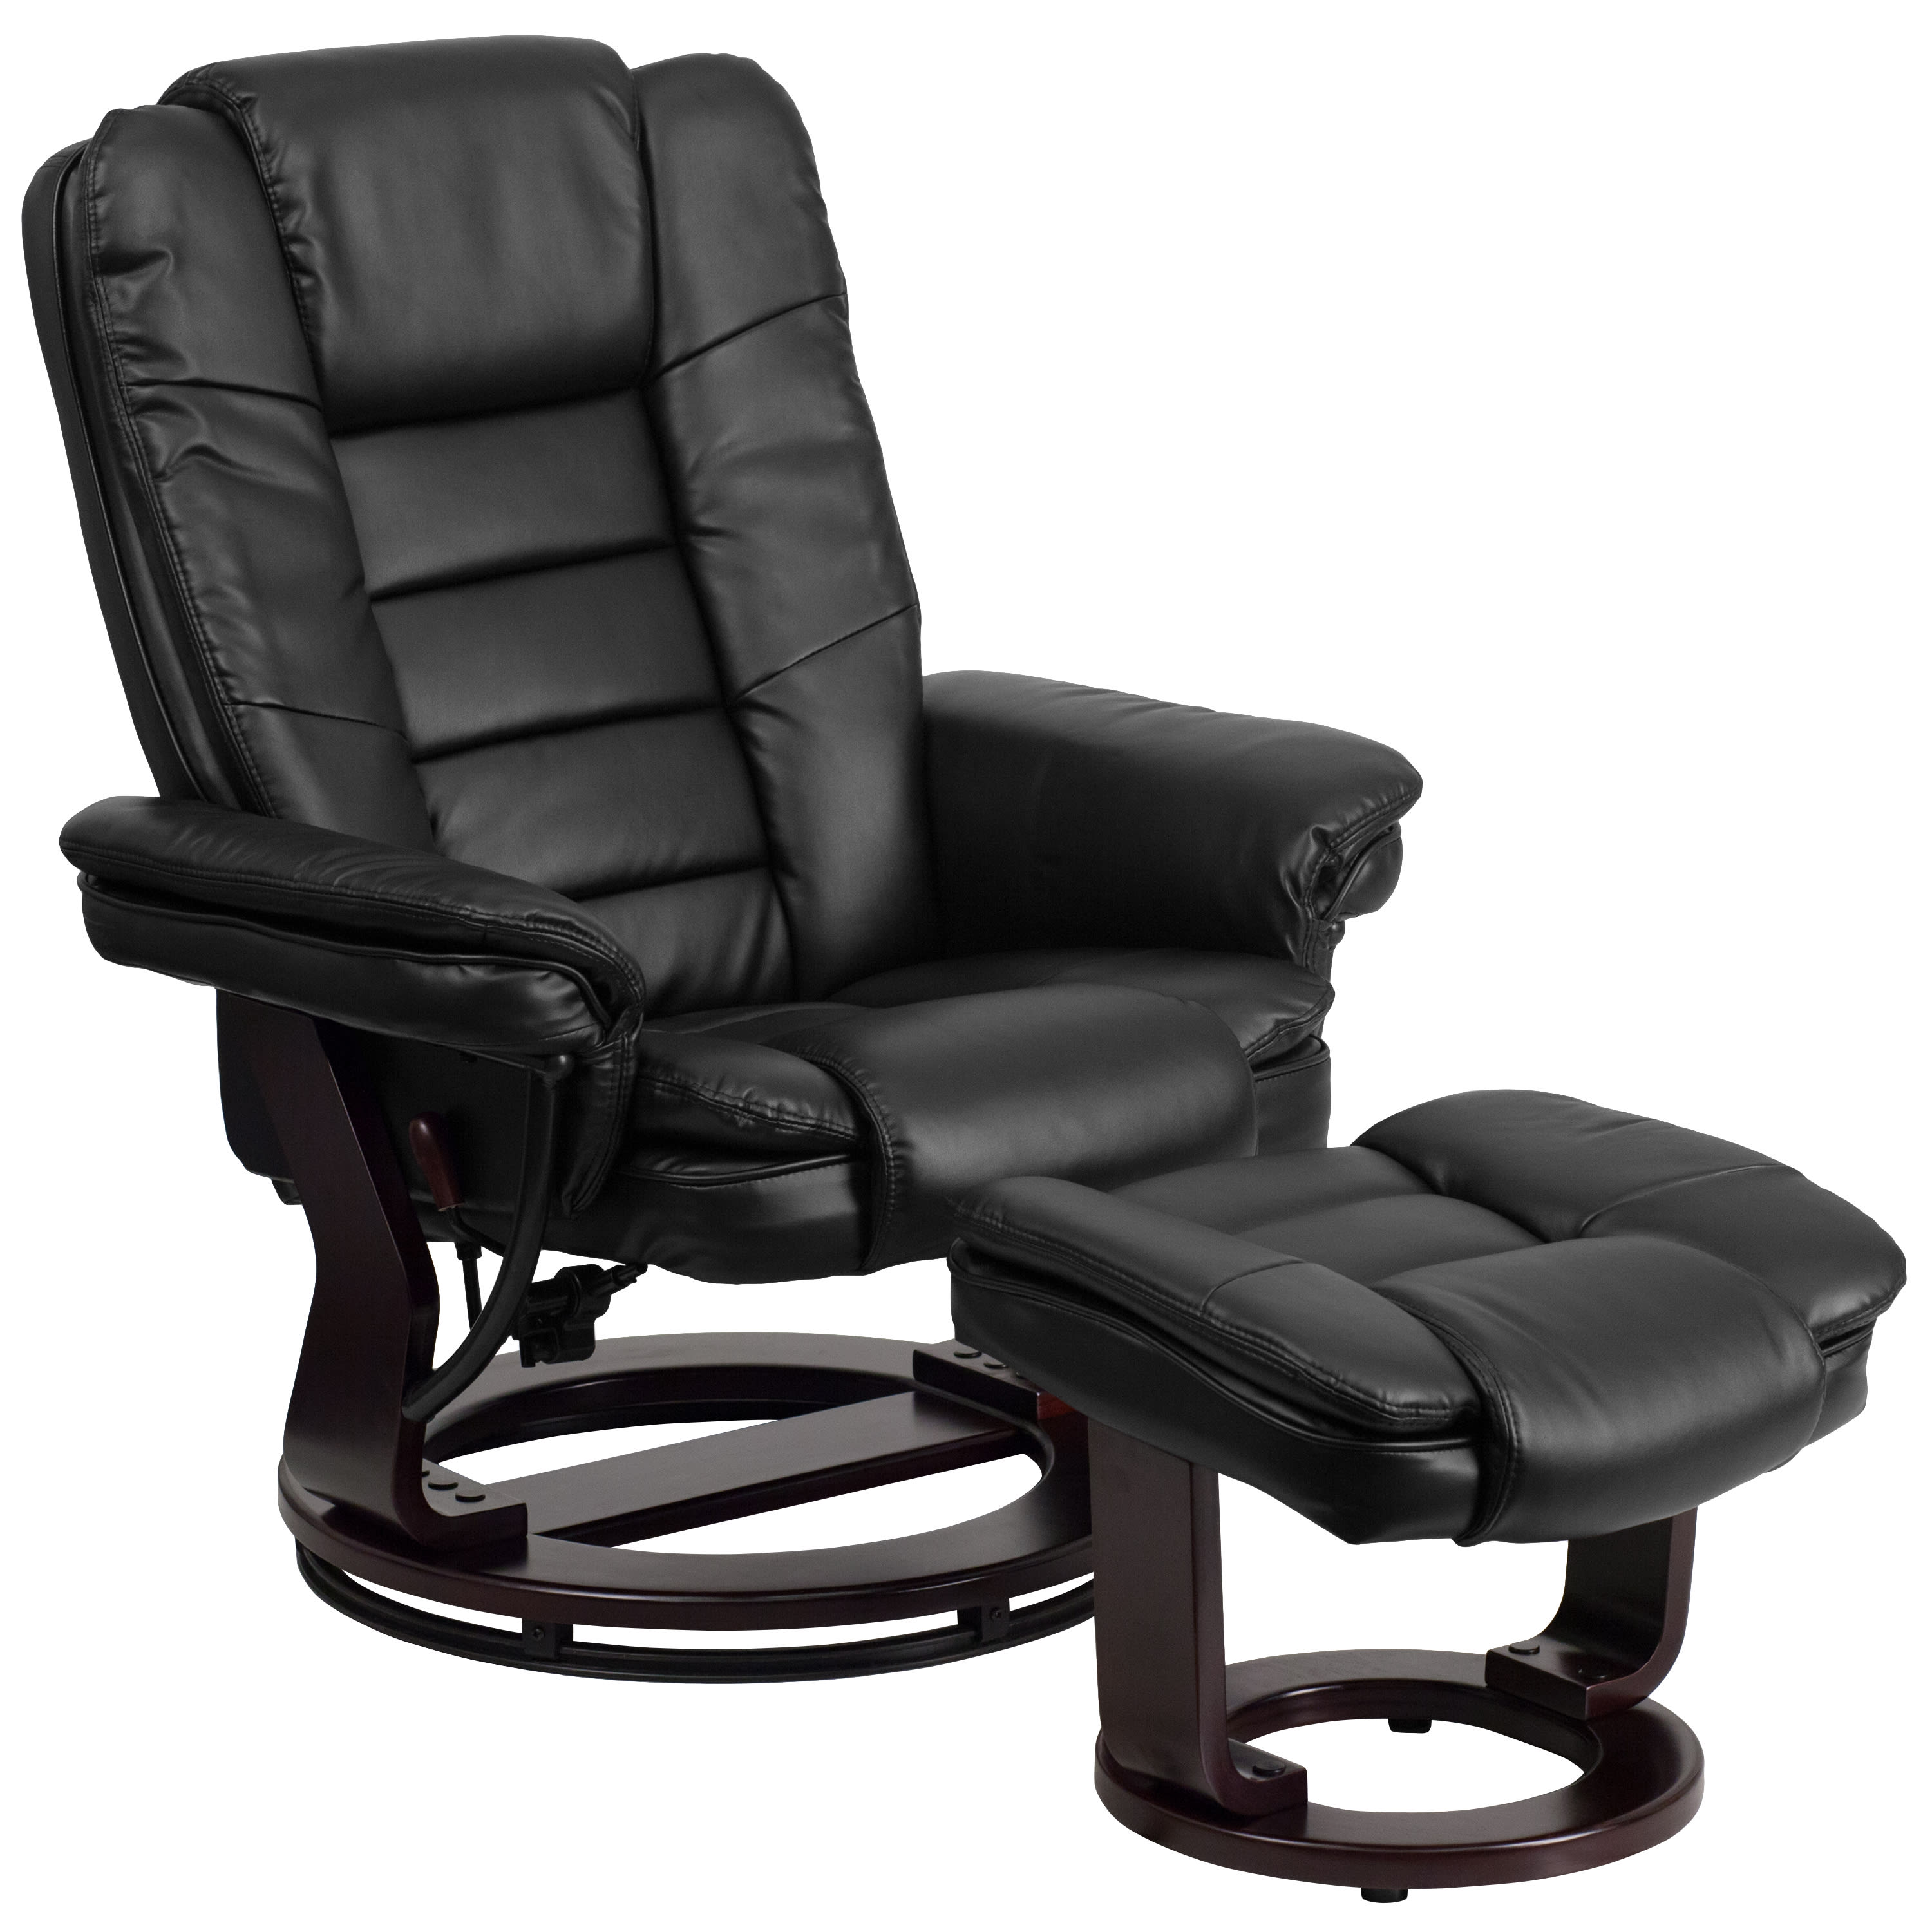 Chairs & Seating | Office Depot OfficeMax